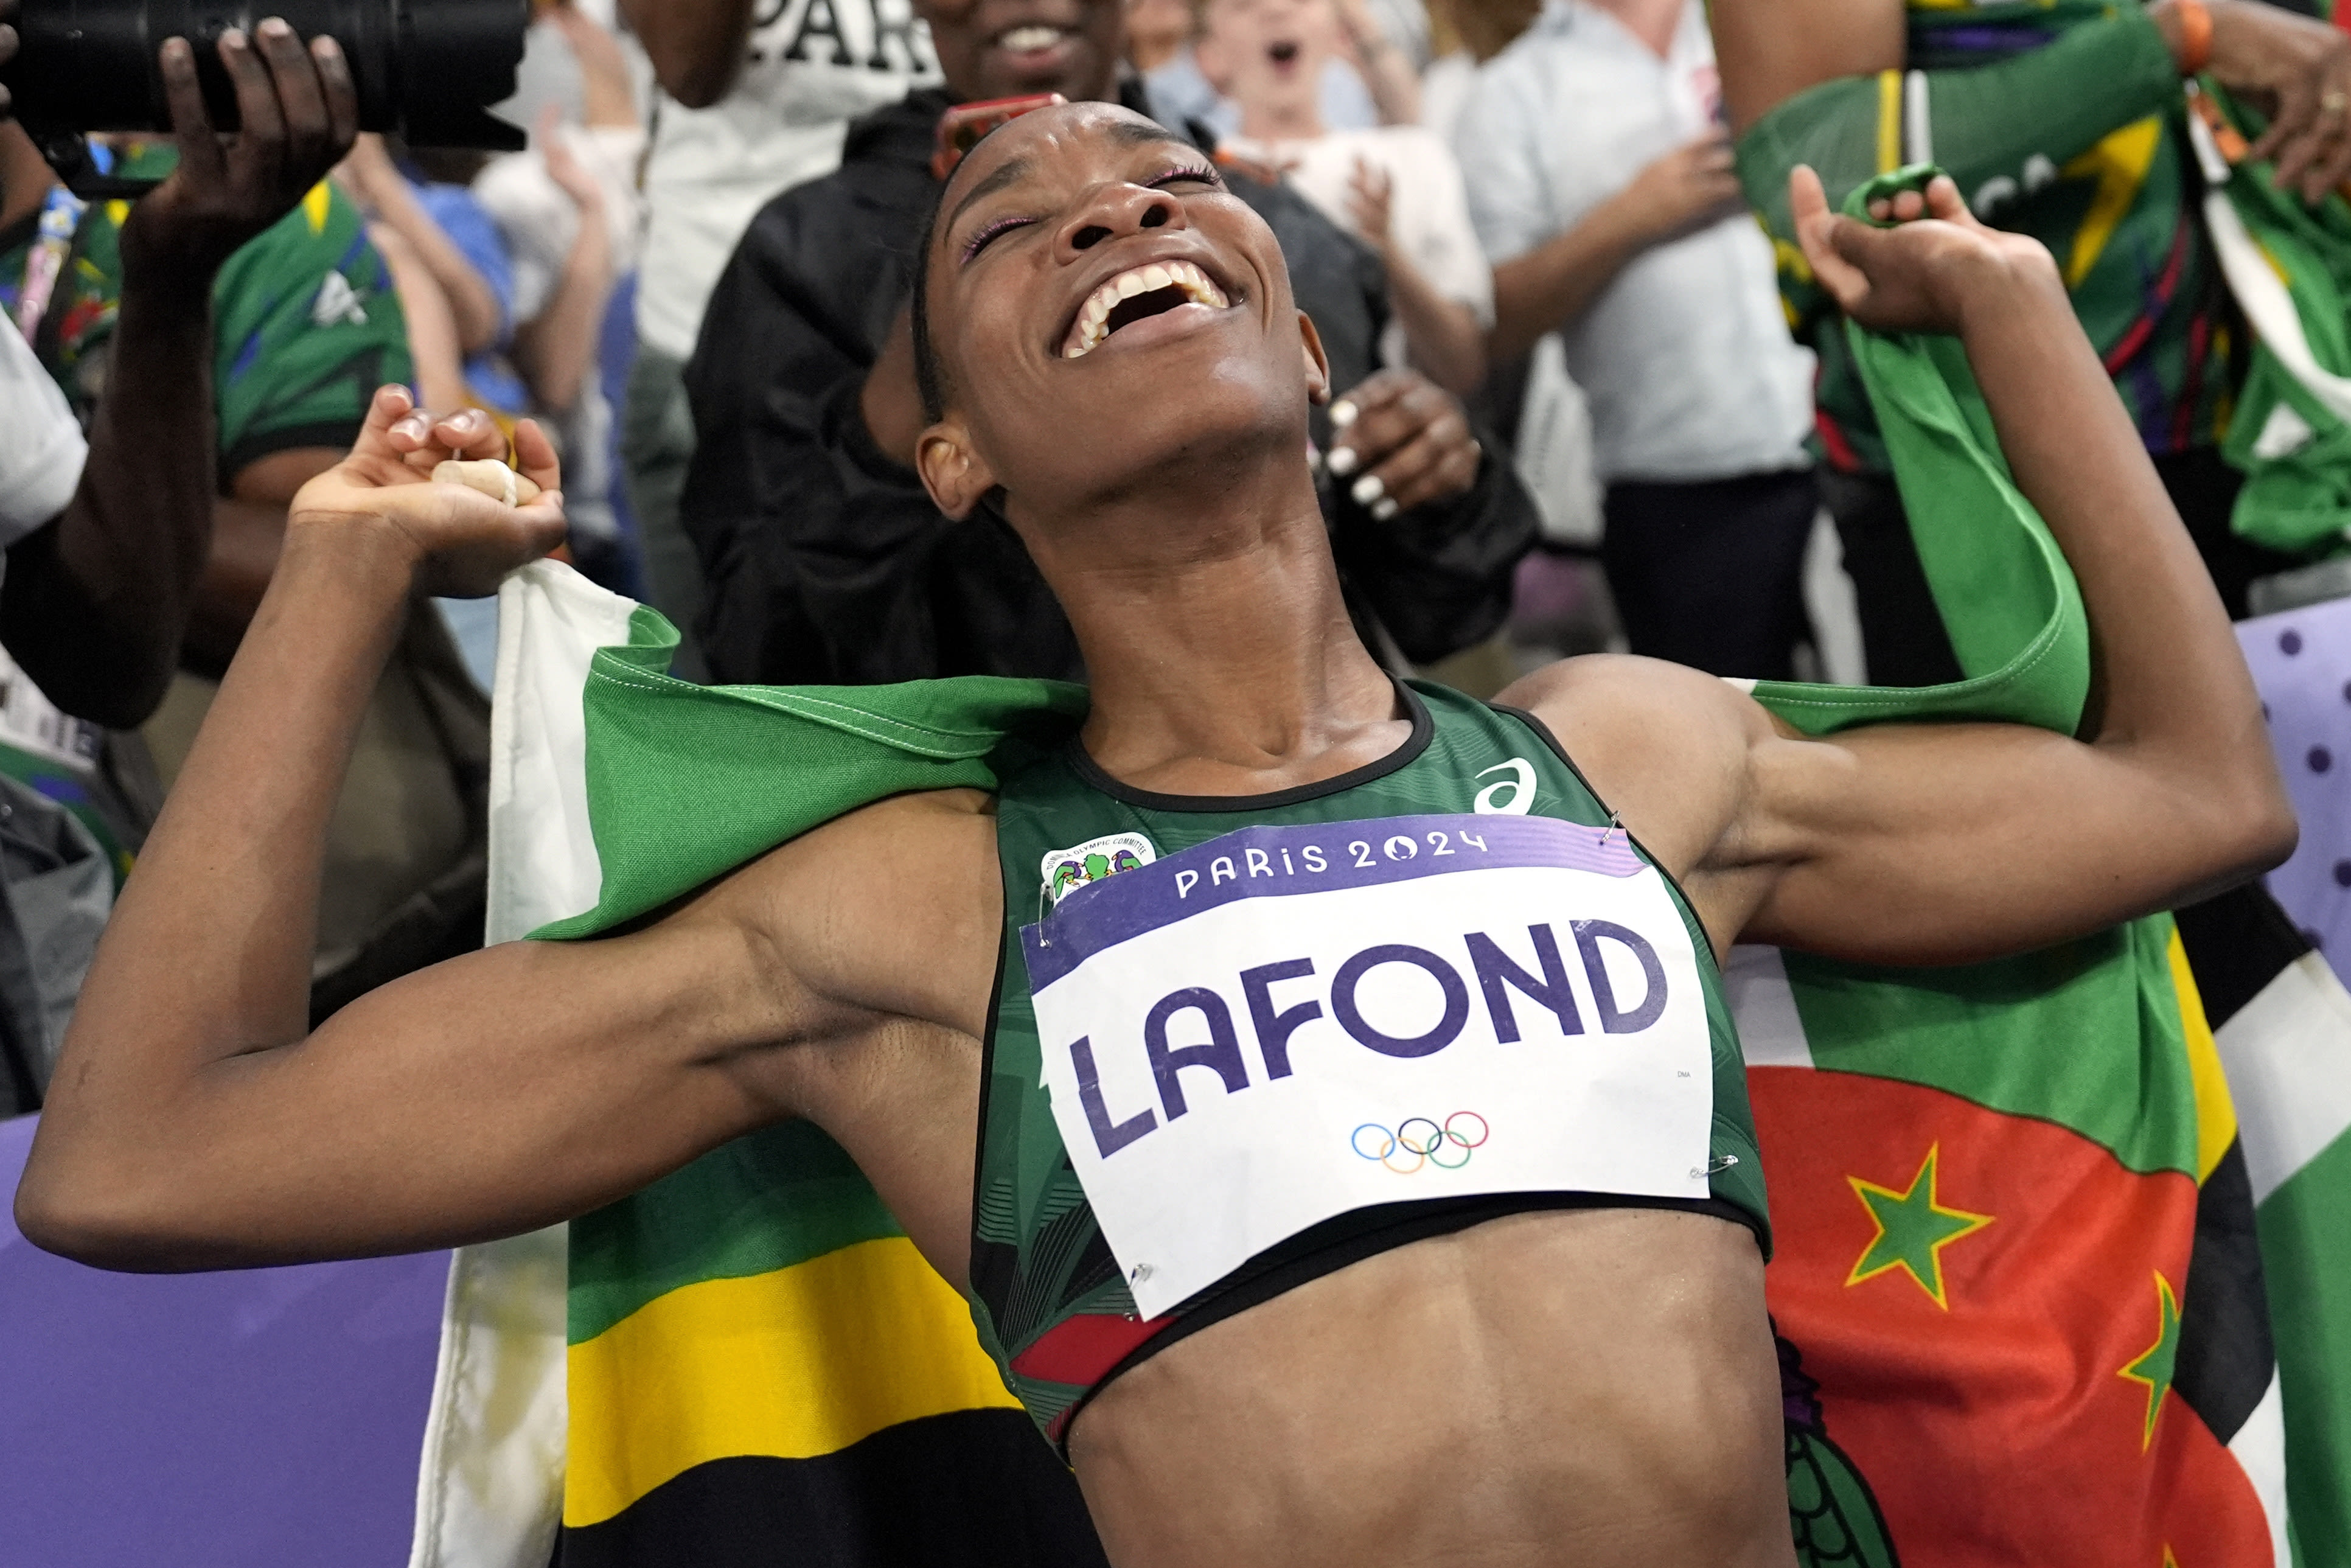 Triple jump champion Thea LaFond on winning Dominica's first Olympic medal: 'It's a really big deal'